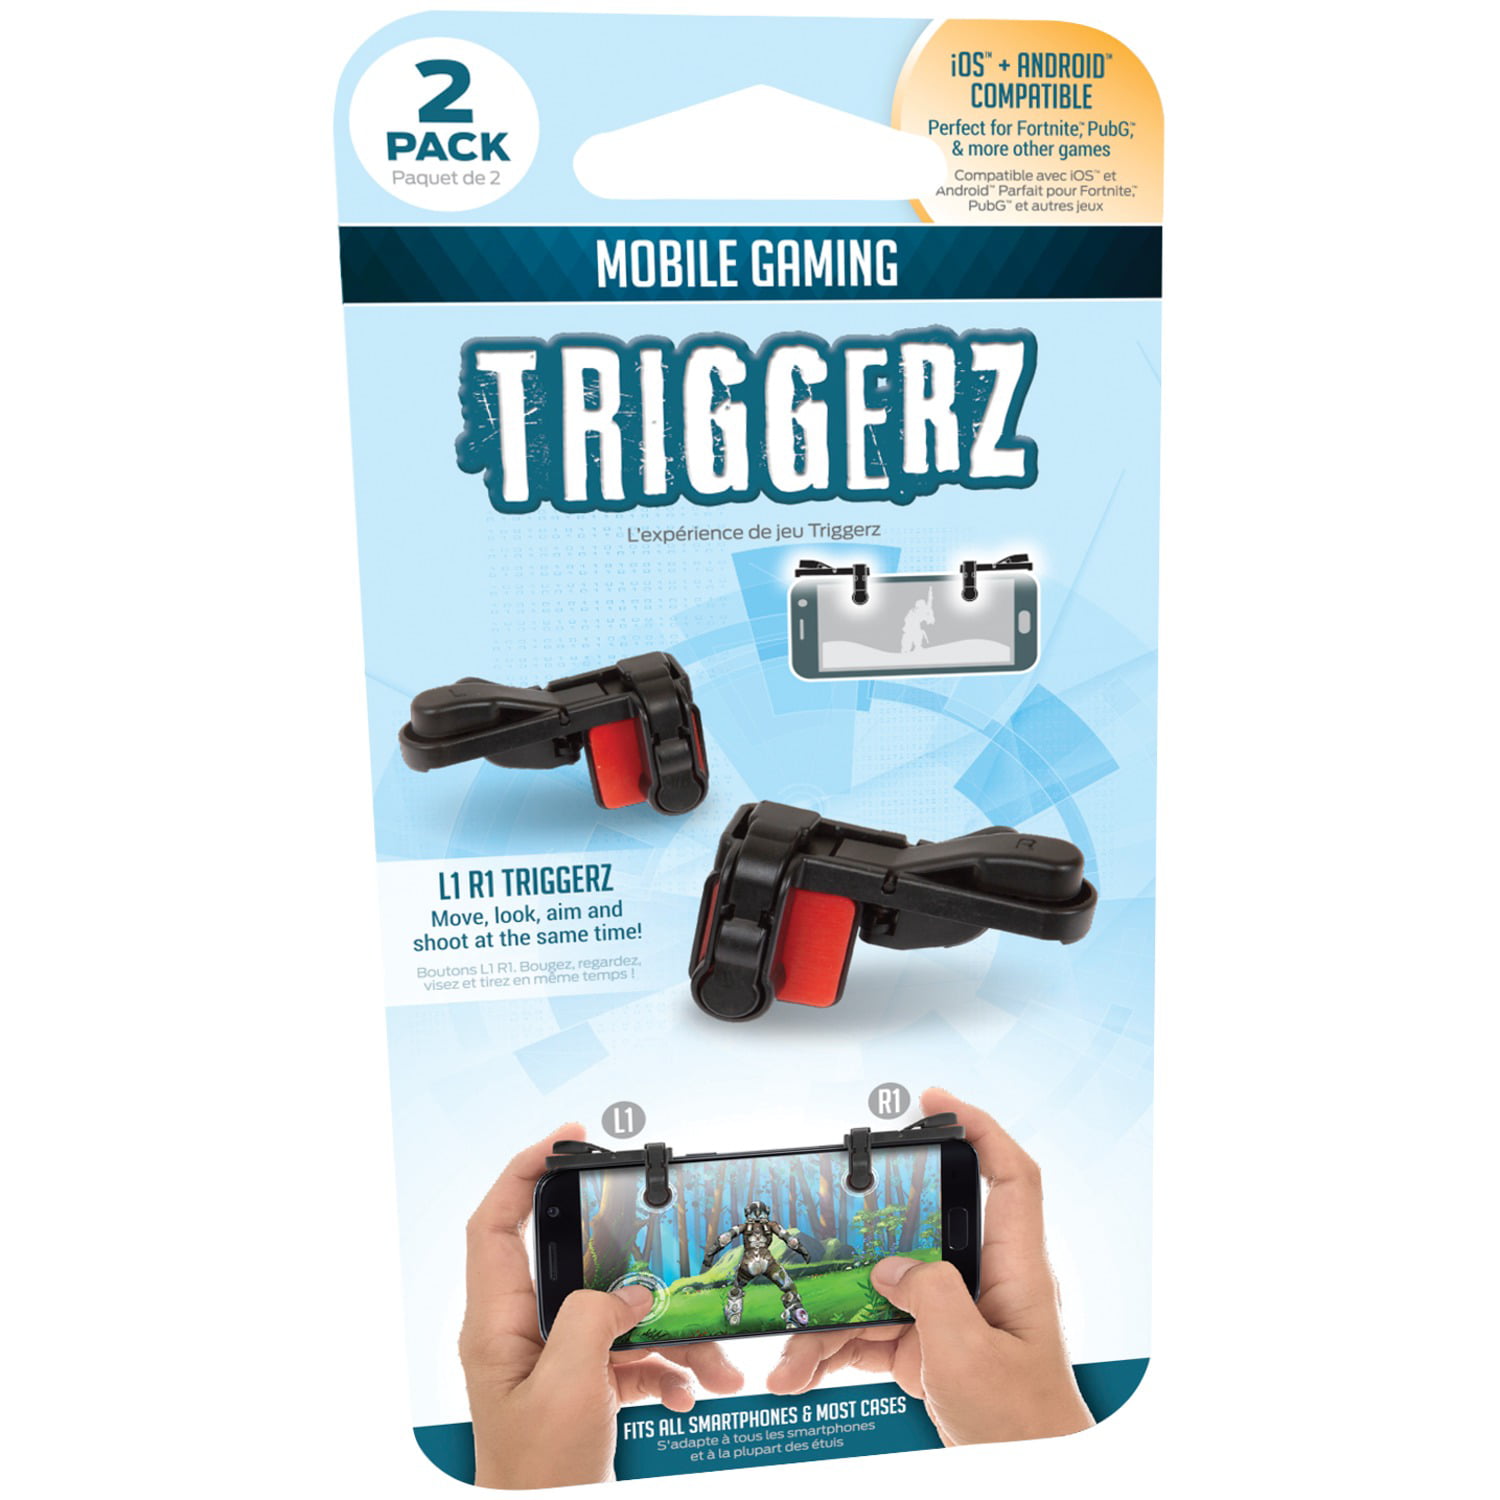 L1 R1 Triggers for Mobile Gaming